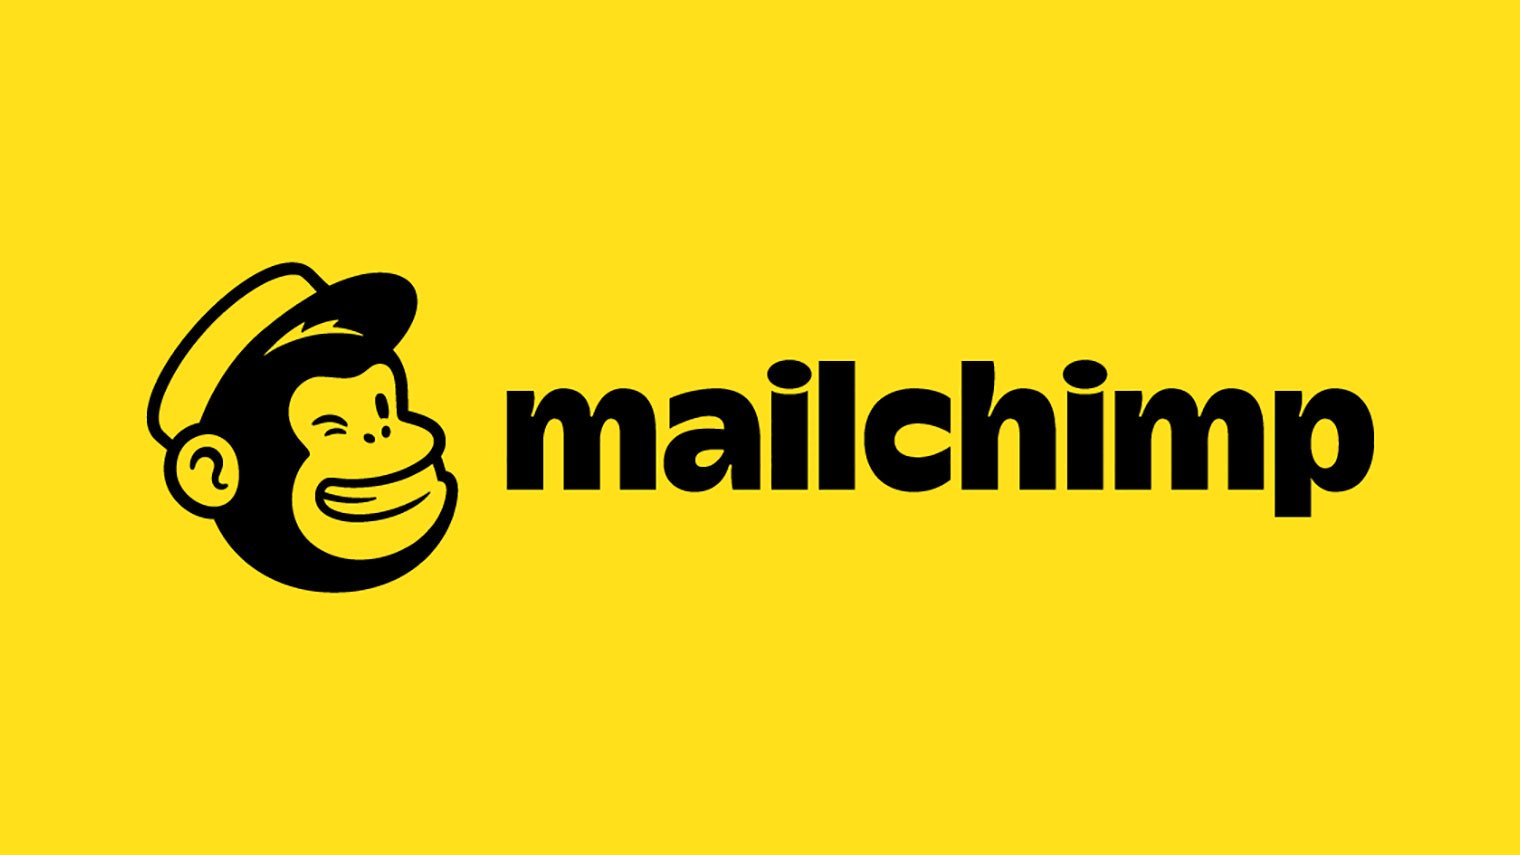 mailchimp tools for email marketing